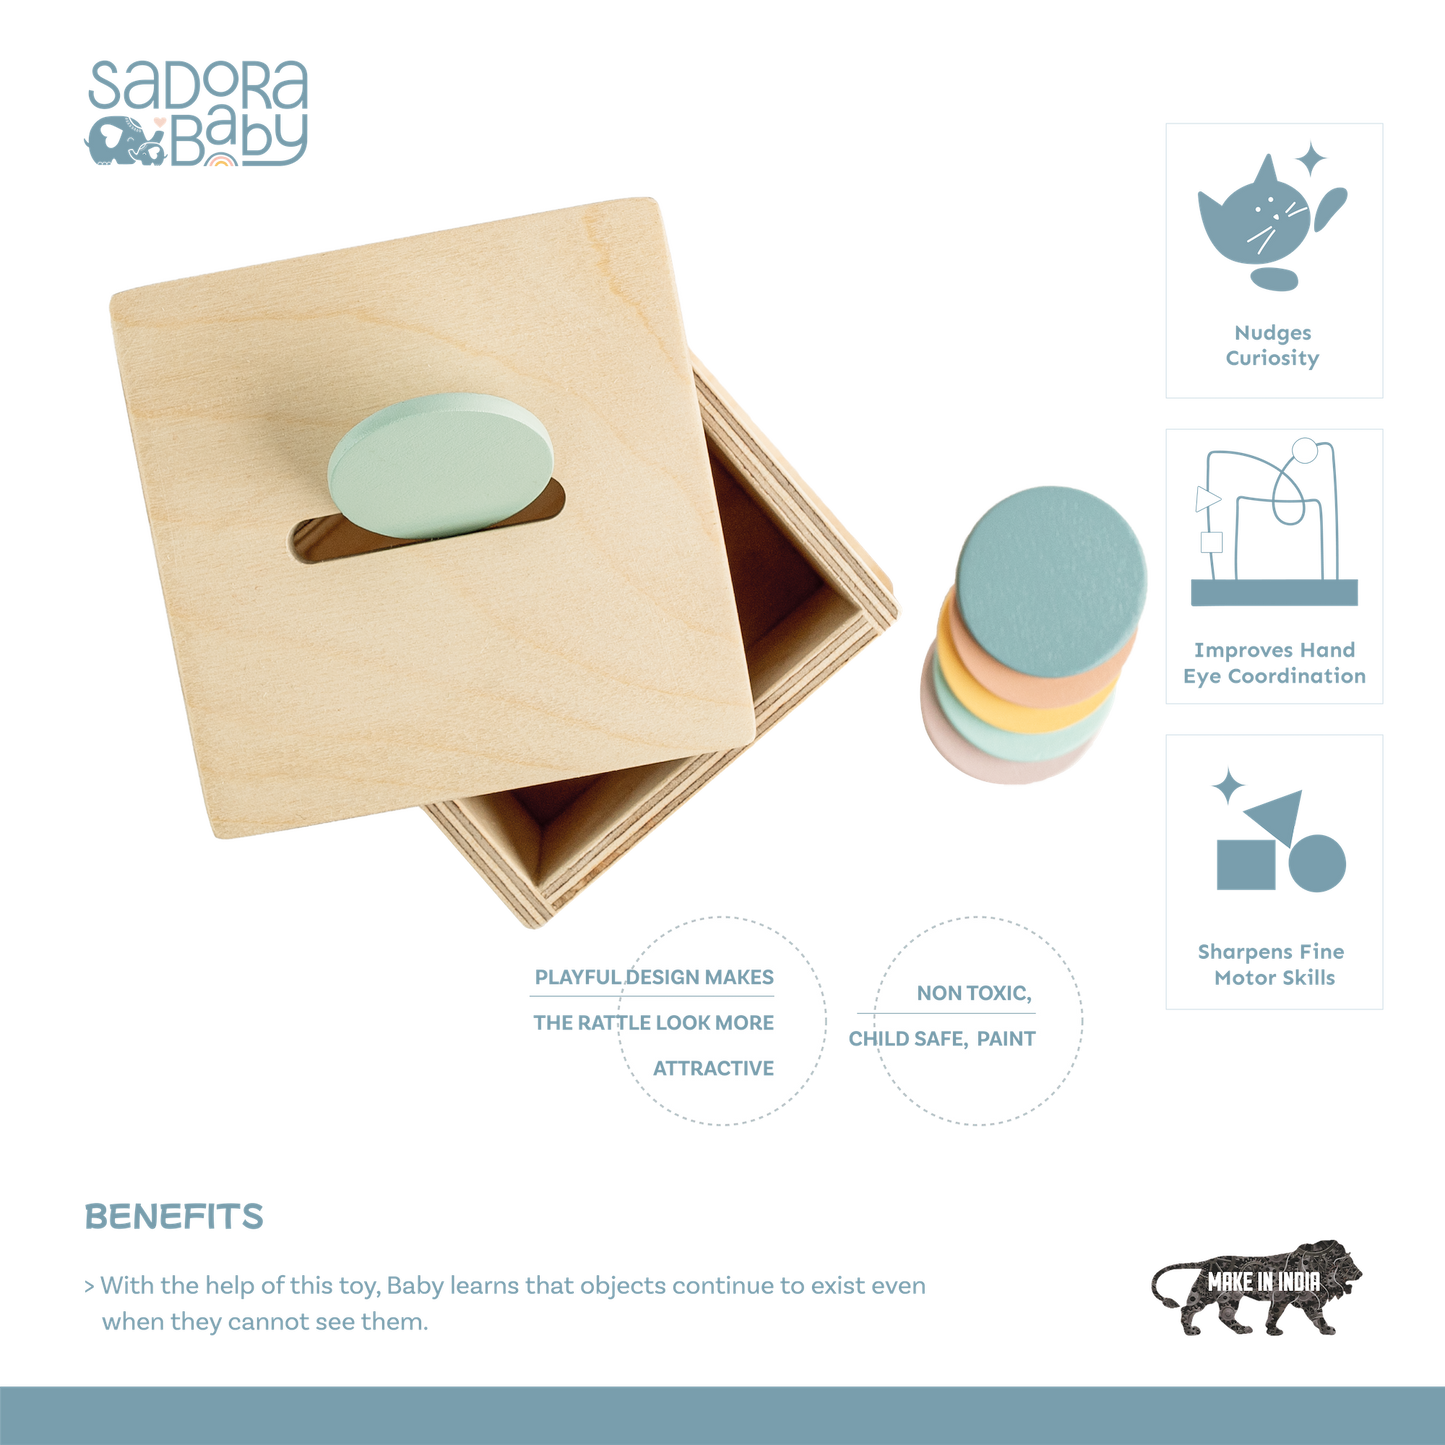 Buy Montessori Wooden Object Permanence Coinbox Online - SkilloToys.com